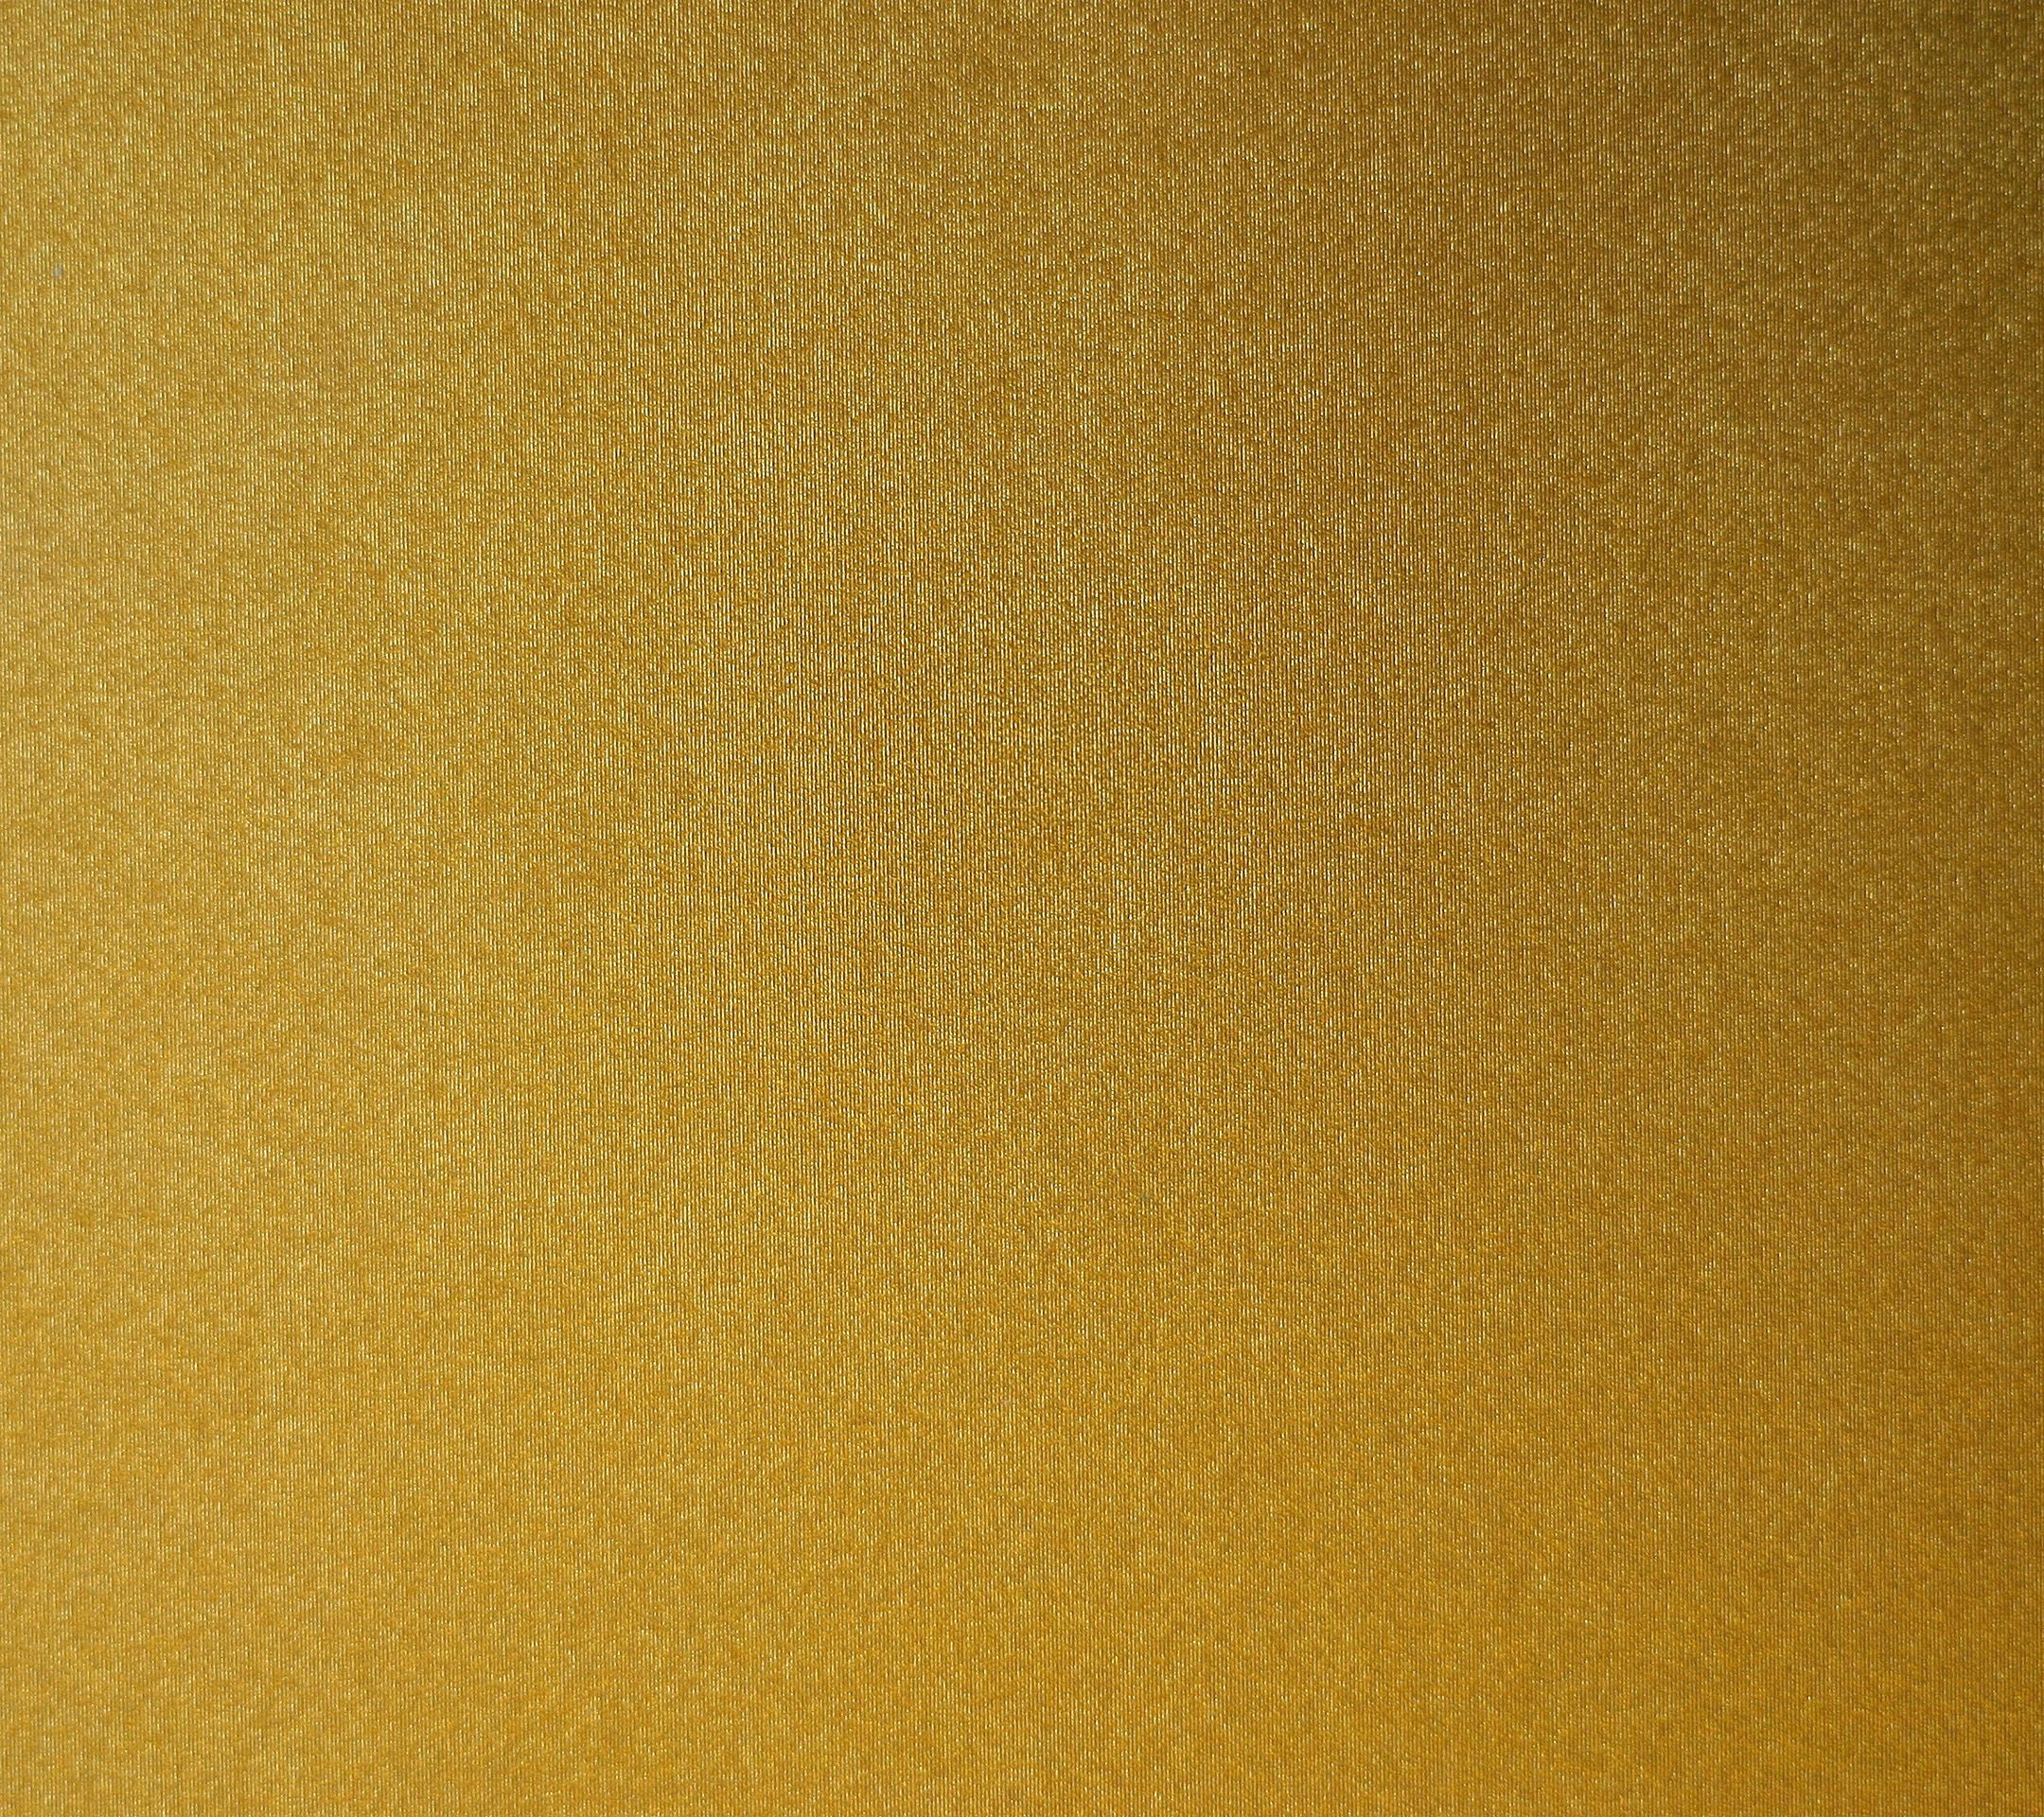 Beautiful 1080p metal and gold wallpaper for the HTC One (M8)